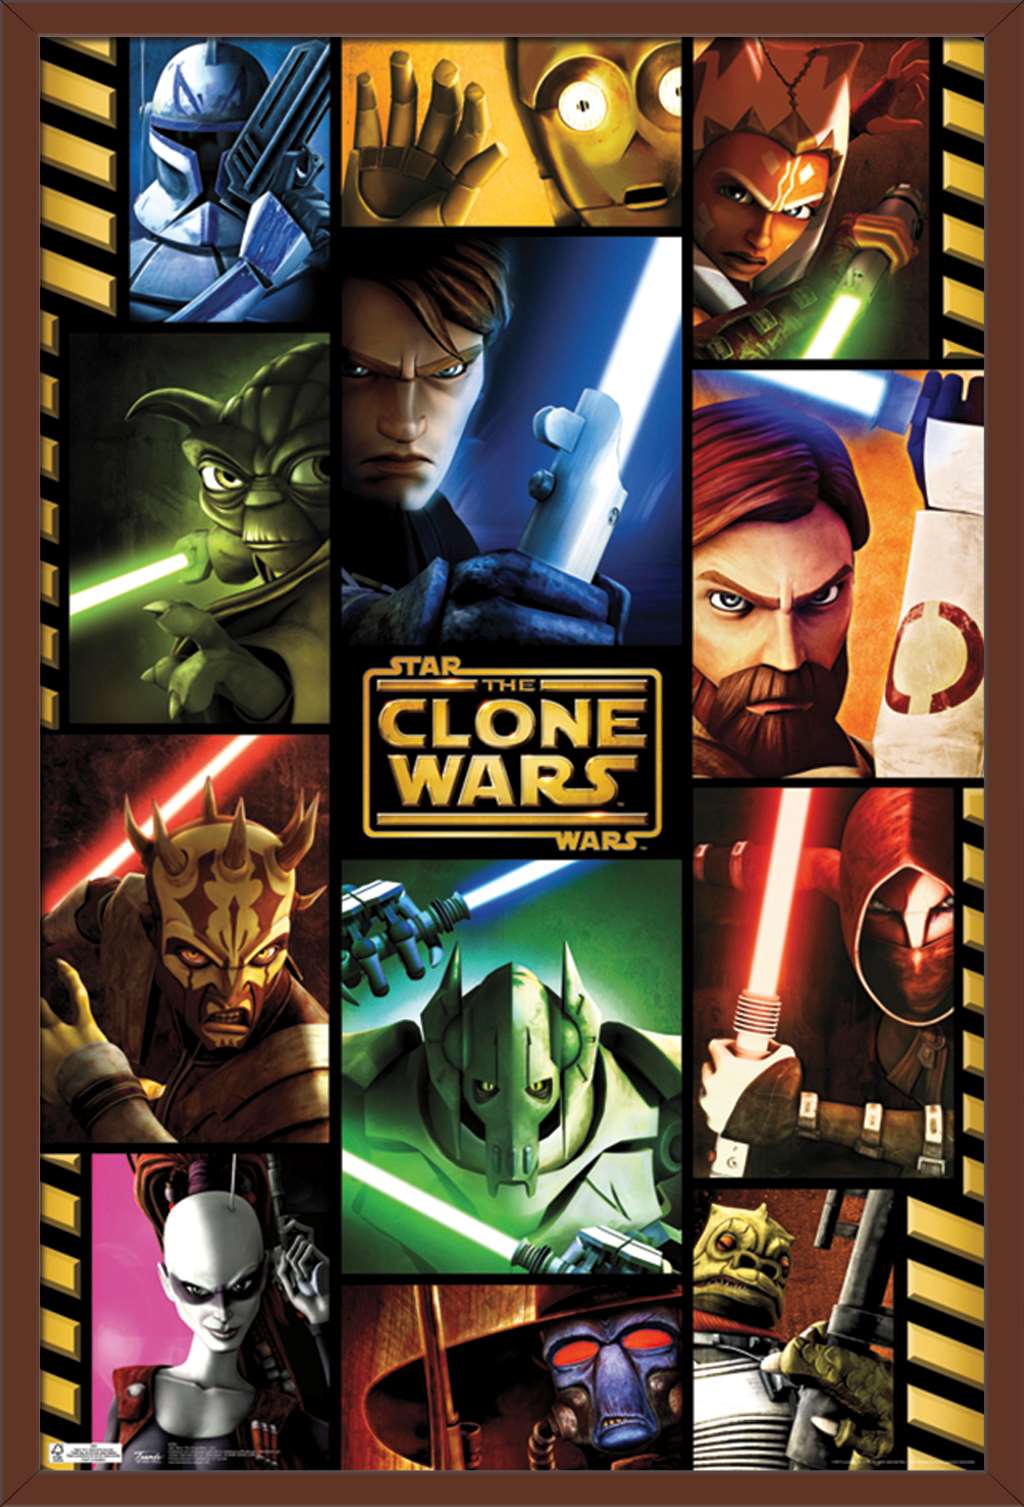 Star Wars: The Clone Wars - Grid Wall Poster, 22.375" x 34", Framed - image 1 of 2